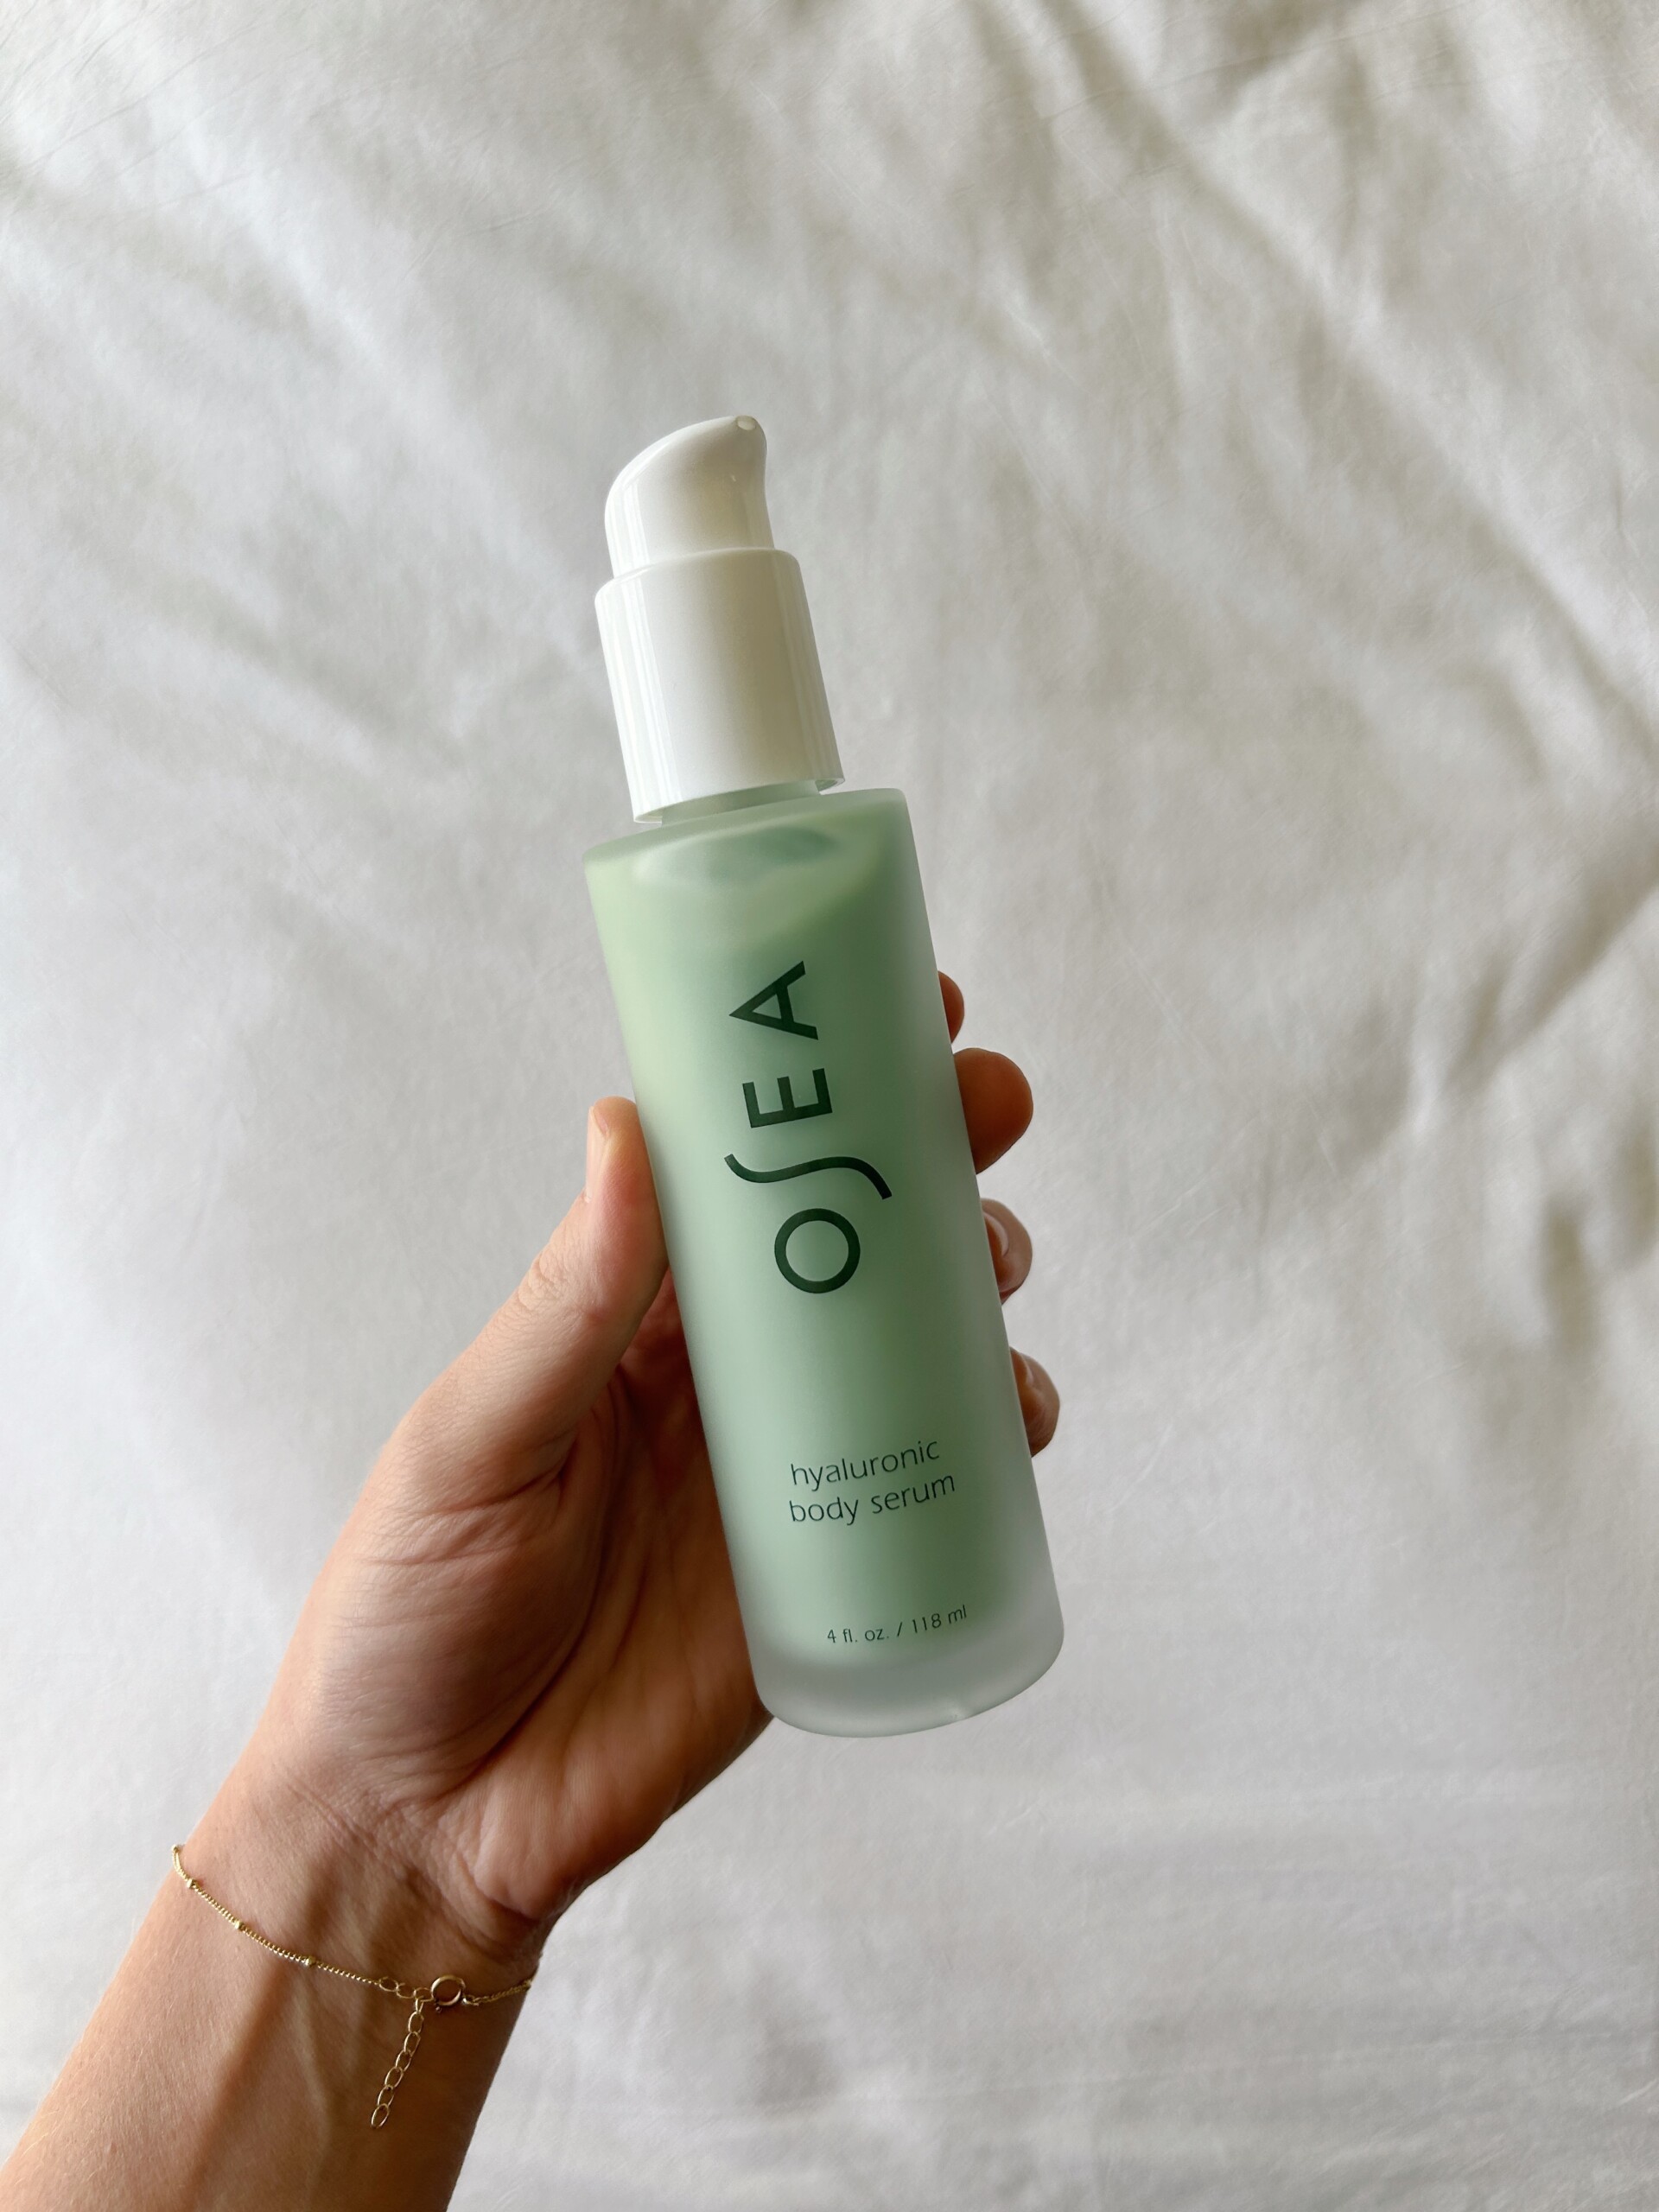 Hand holding a bottle of Osea Hyaluronic Body Serum